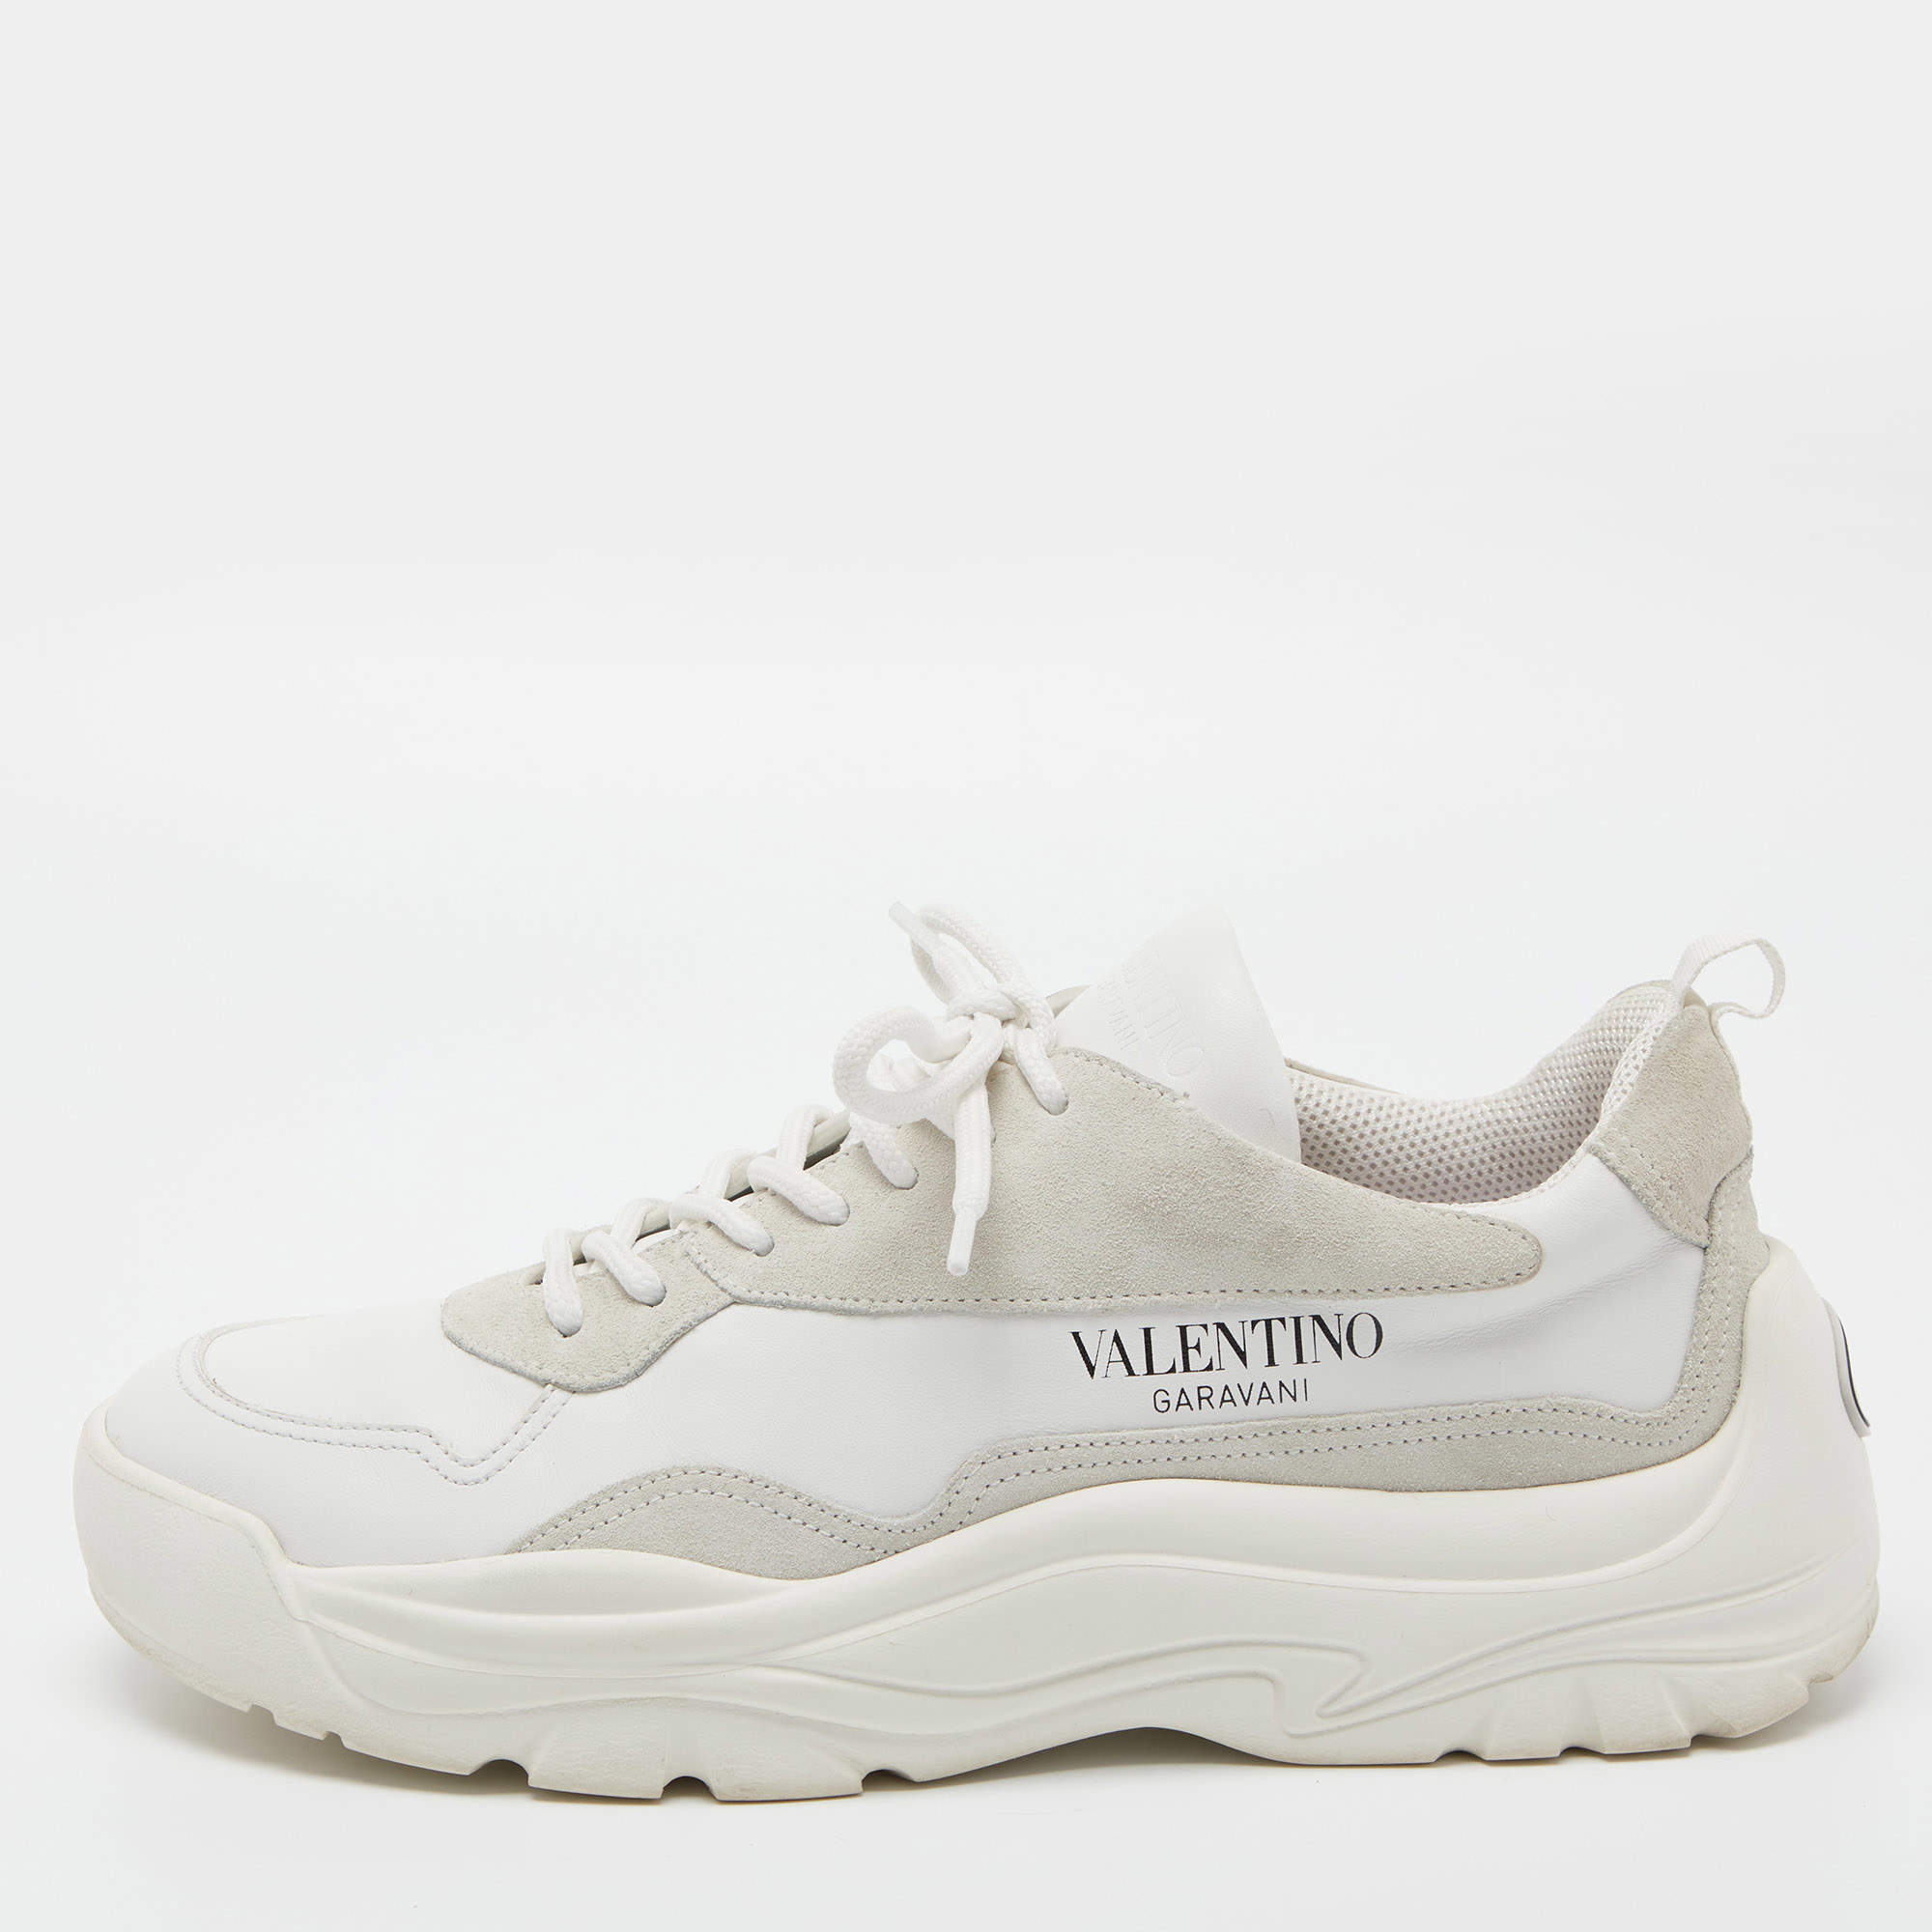 Valentino White Leather and Suede Sneakers Size 42